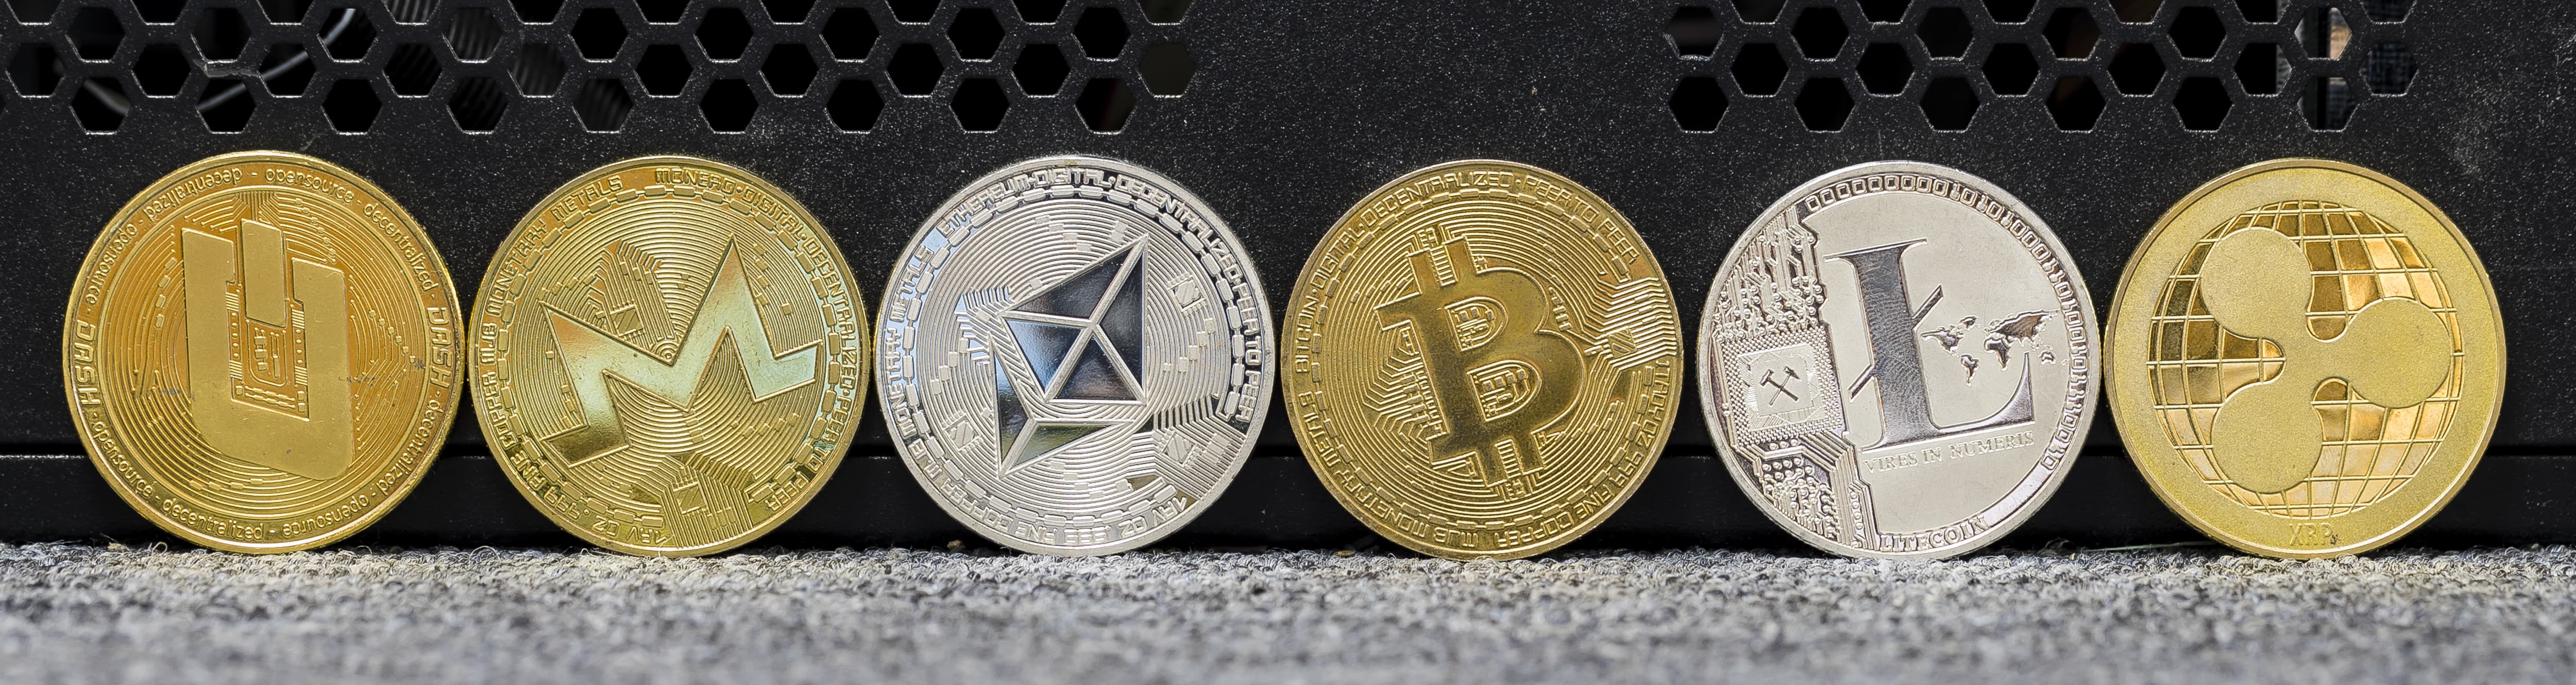 Cryptocurrencies tumble, with bitcoin falling 7% and ether down 8% in the last 2..